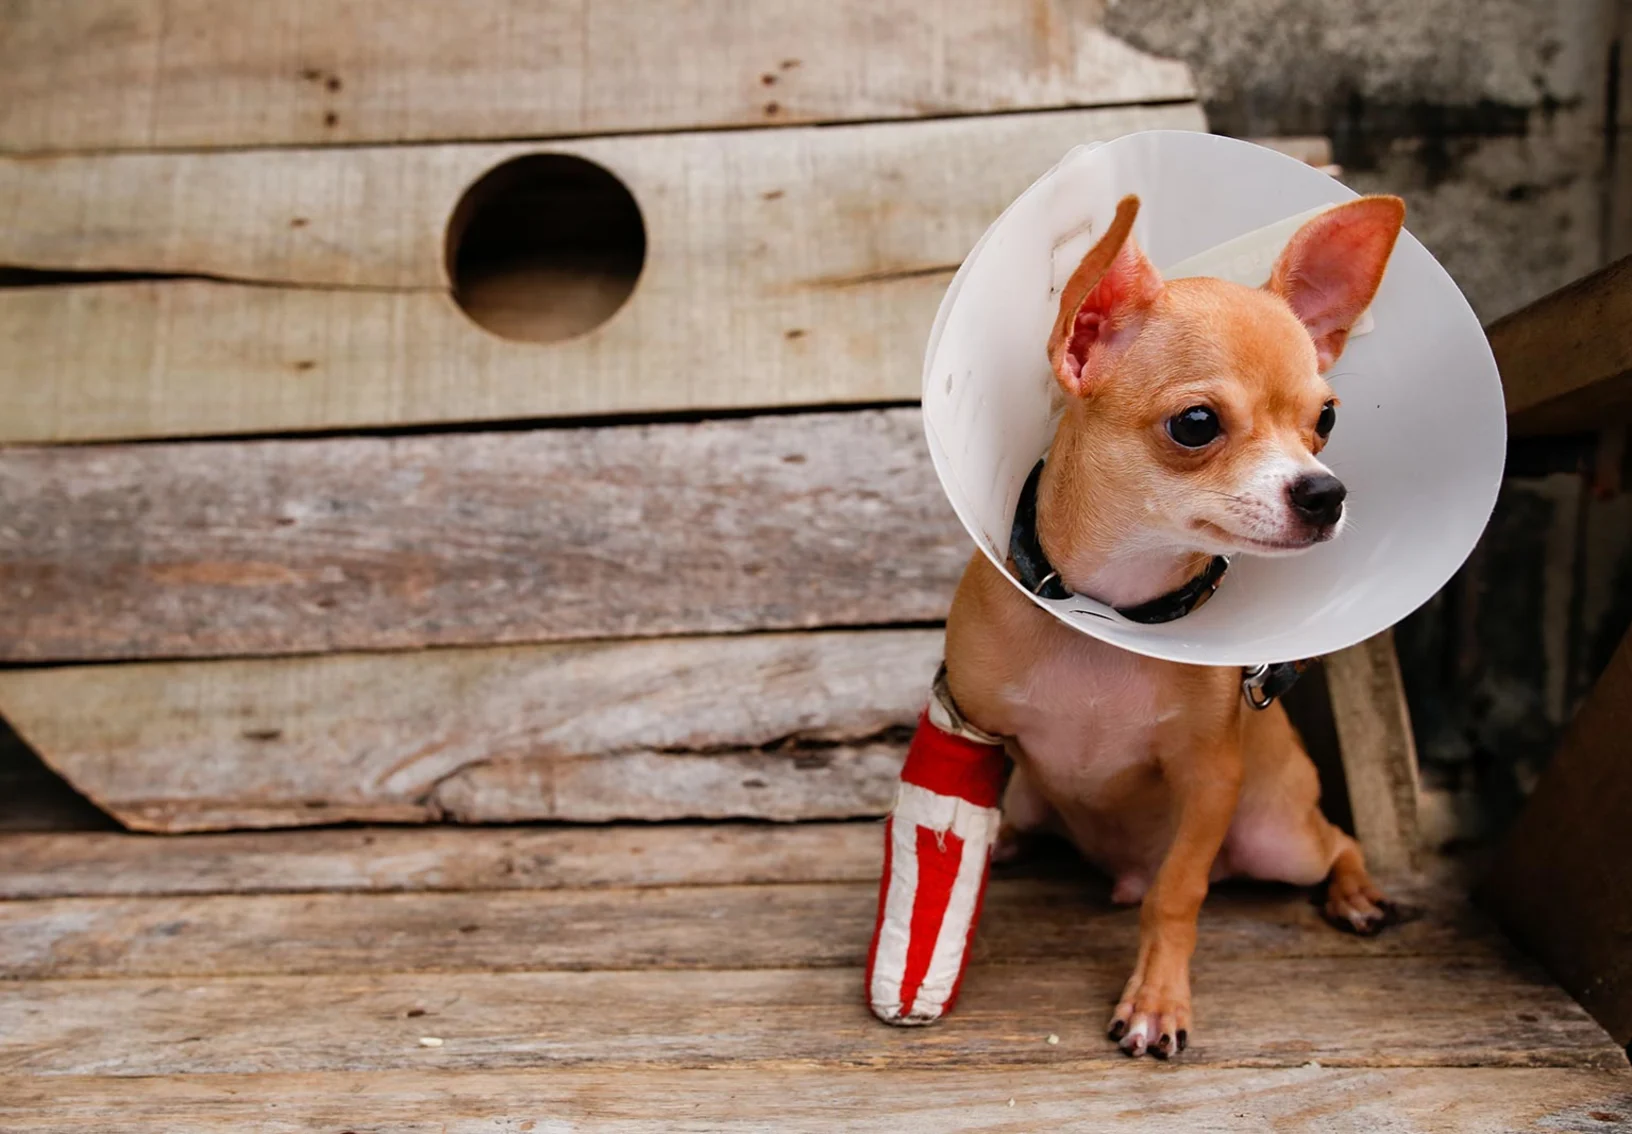 A dog with a cast and cone 